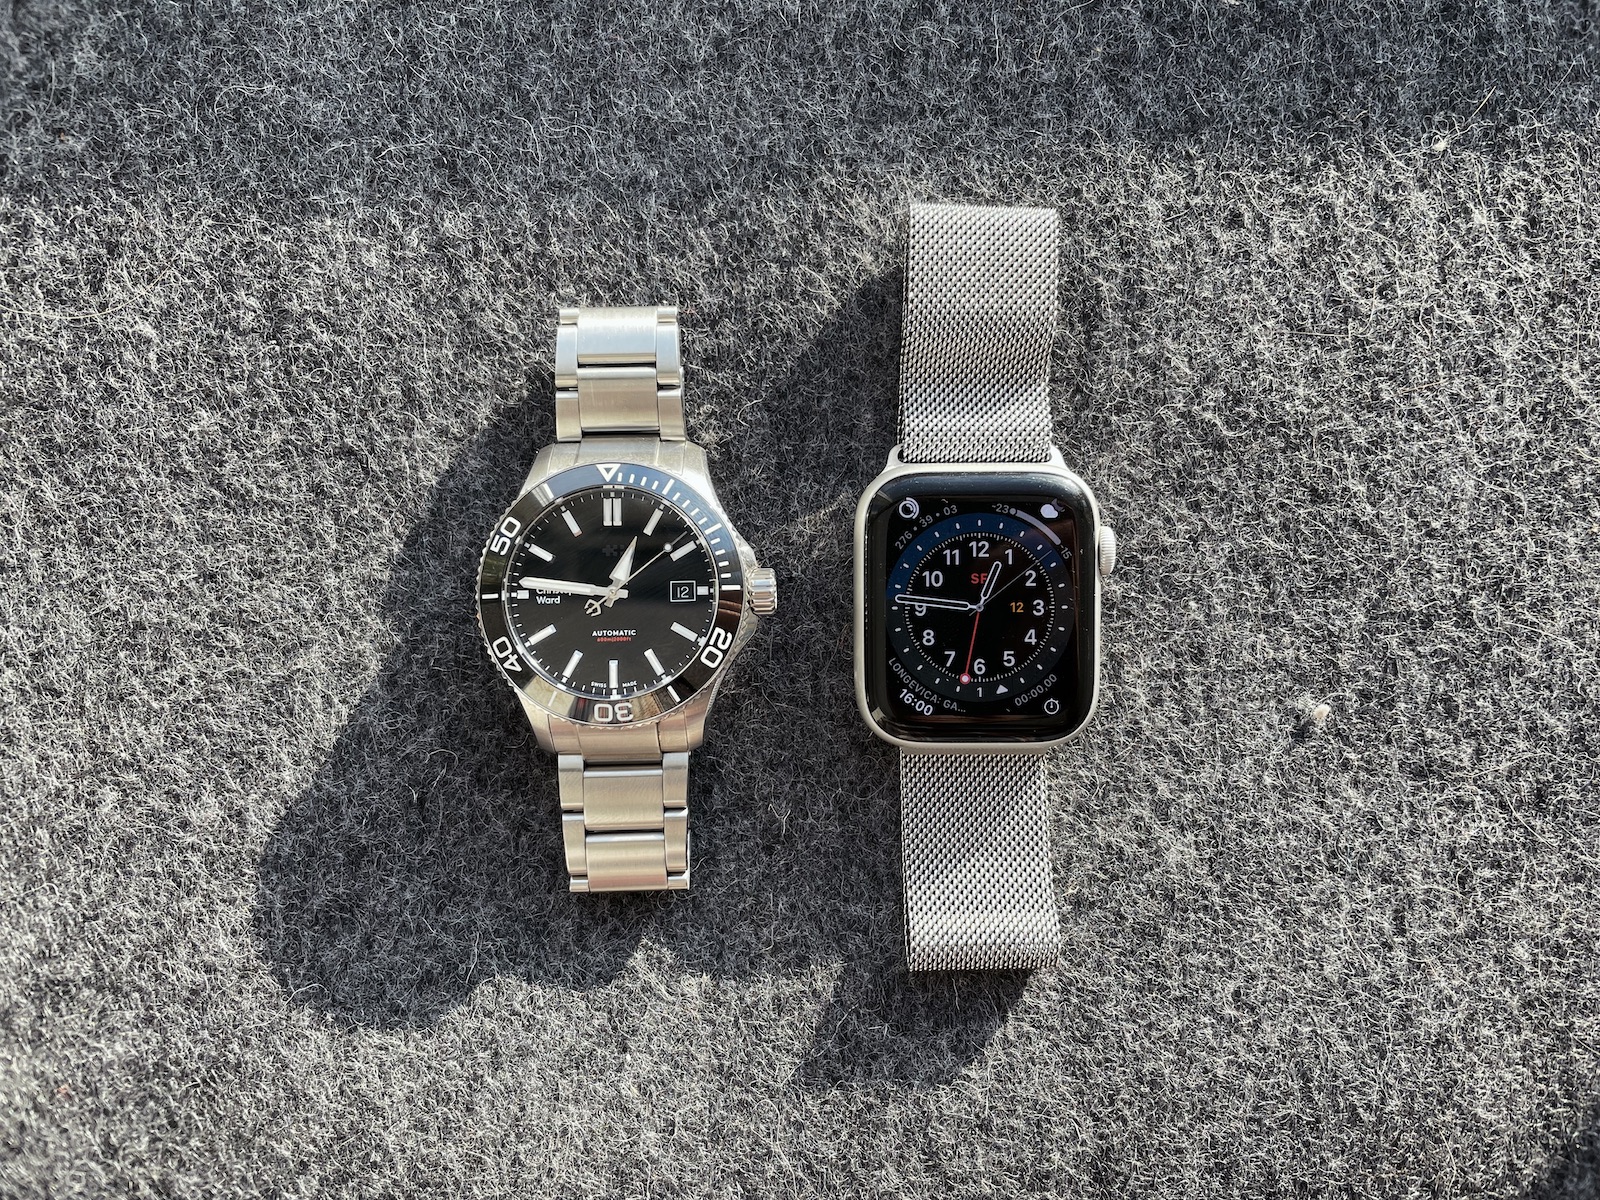 Why I Dropped Apple Watch for a Mechanical Watch